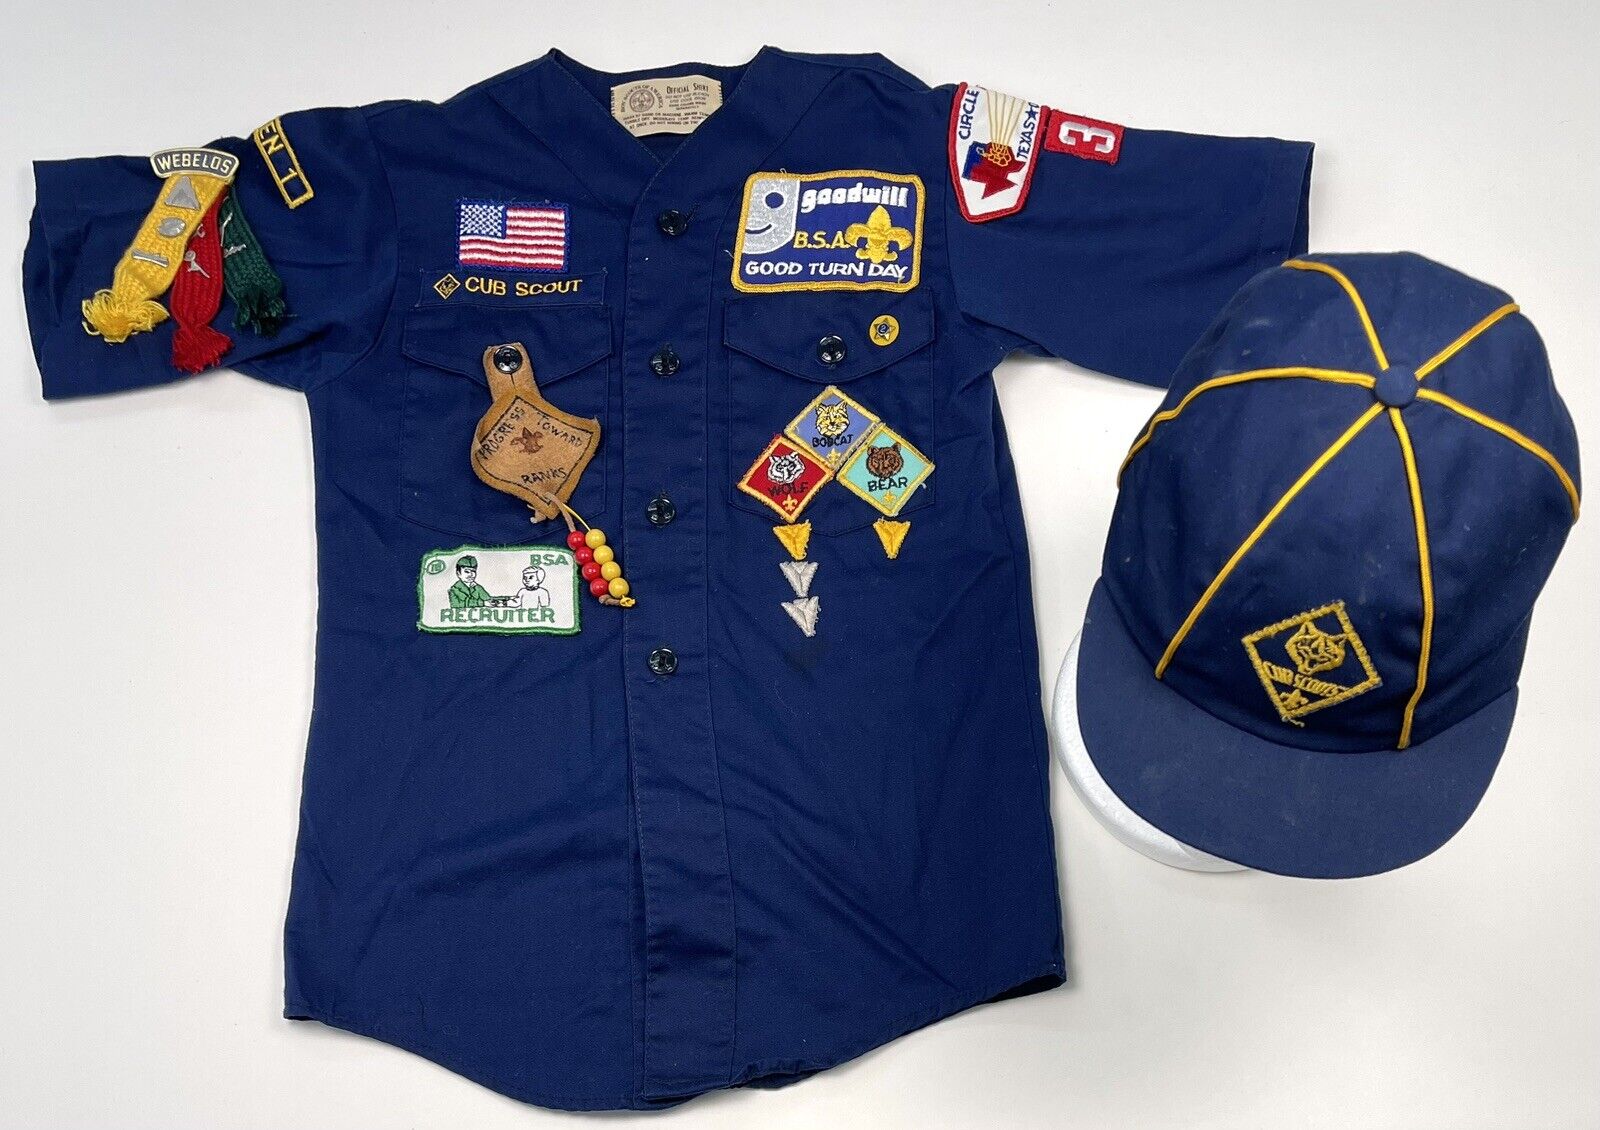 VTG 1970s CUB SCOUTS S/S Official Shirt & Cap w/ 14 Patches, 11 Pins & Ribbons